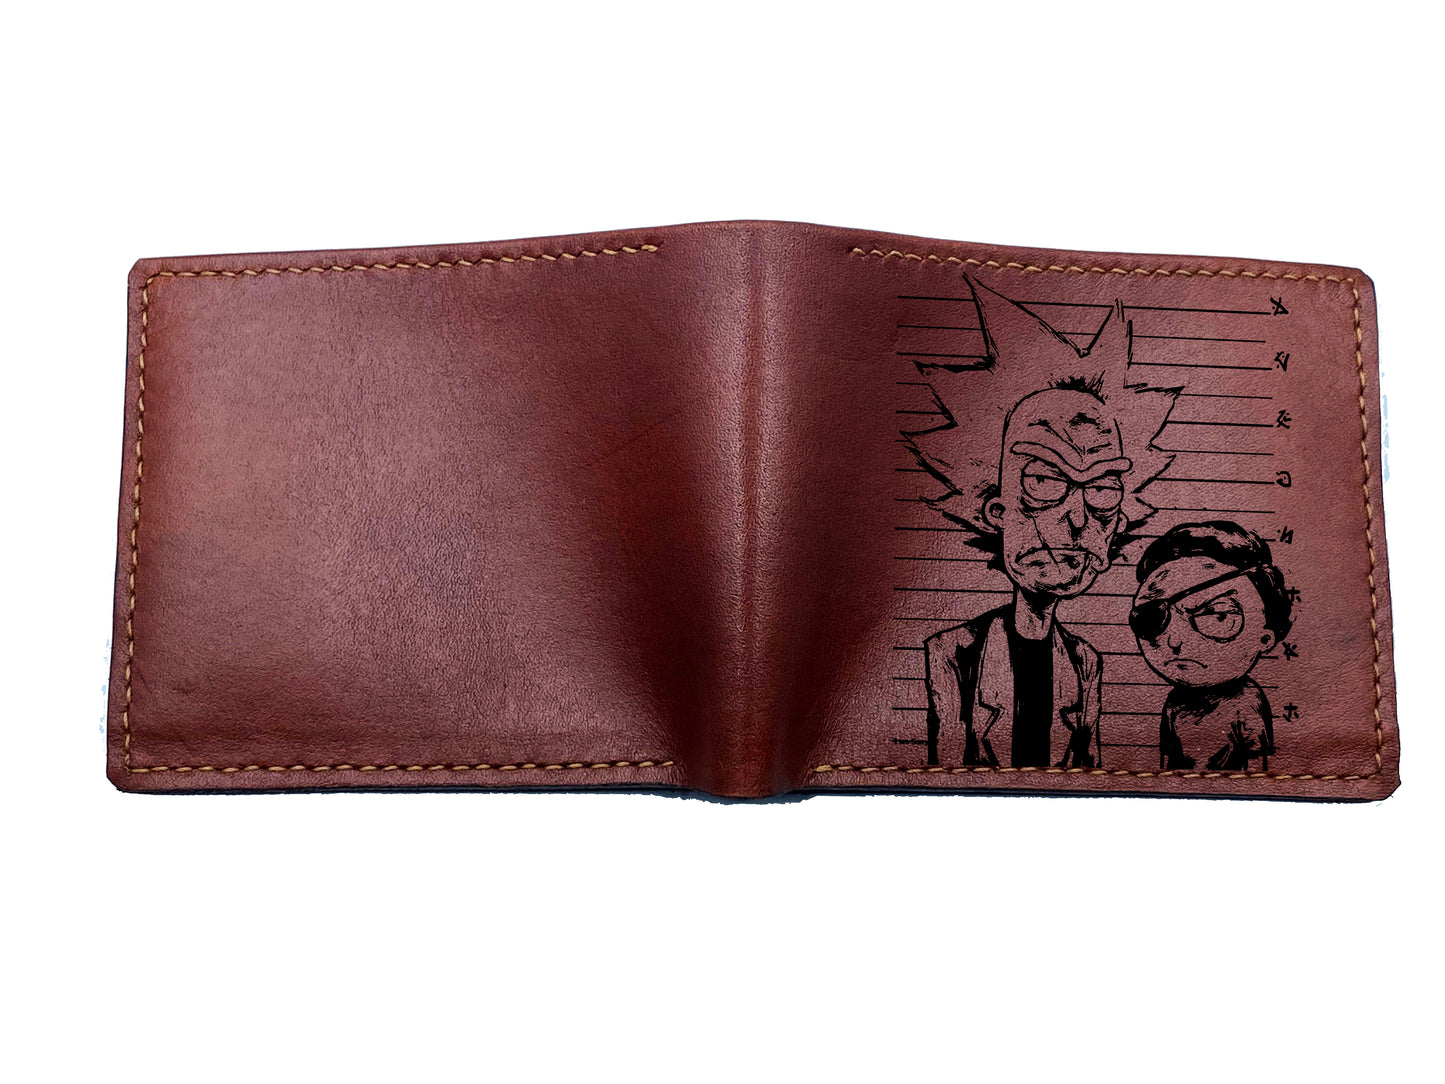 Mayan Corner - Rick and Morty movie series characters leather men's wallet, cartoon art wallet, cool leather gift for him - RM280101